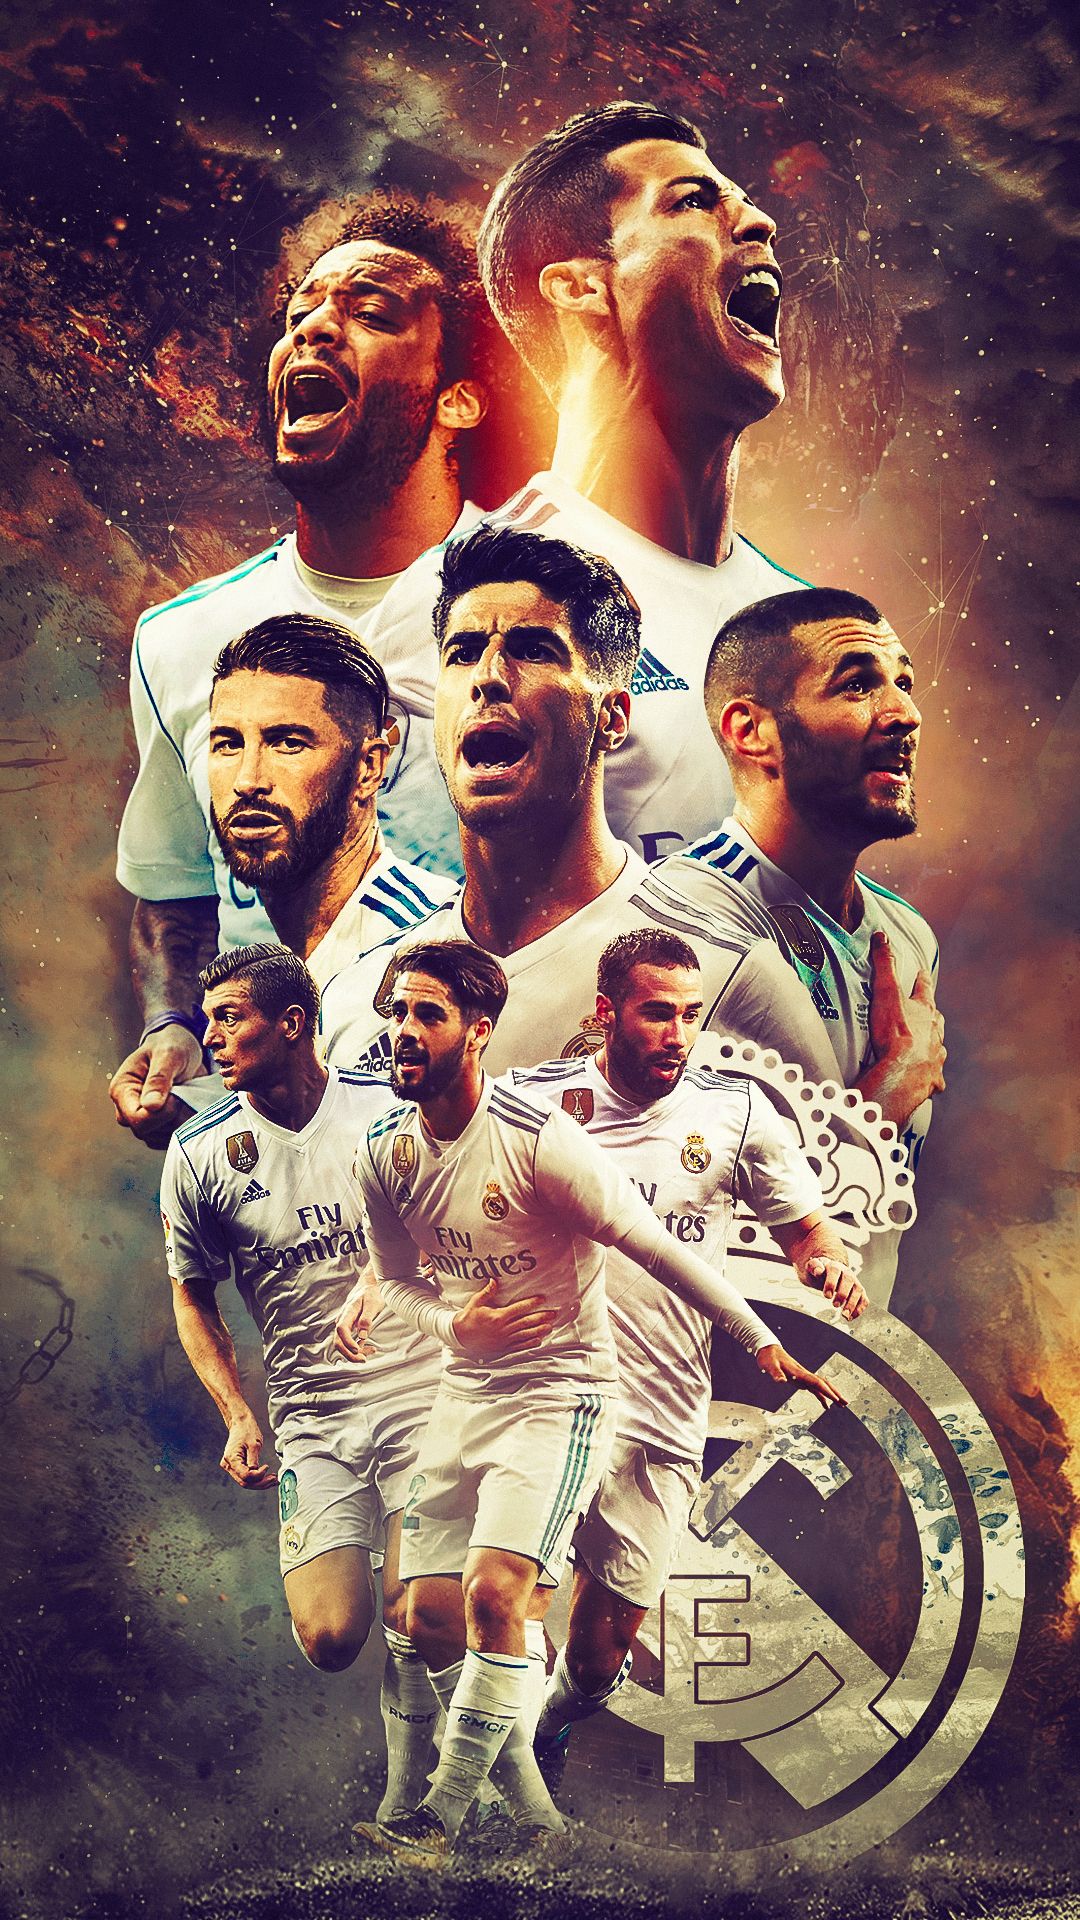 Real Madrid Cf Poster Wallpapers